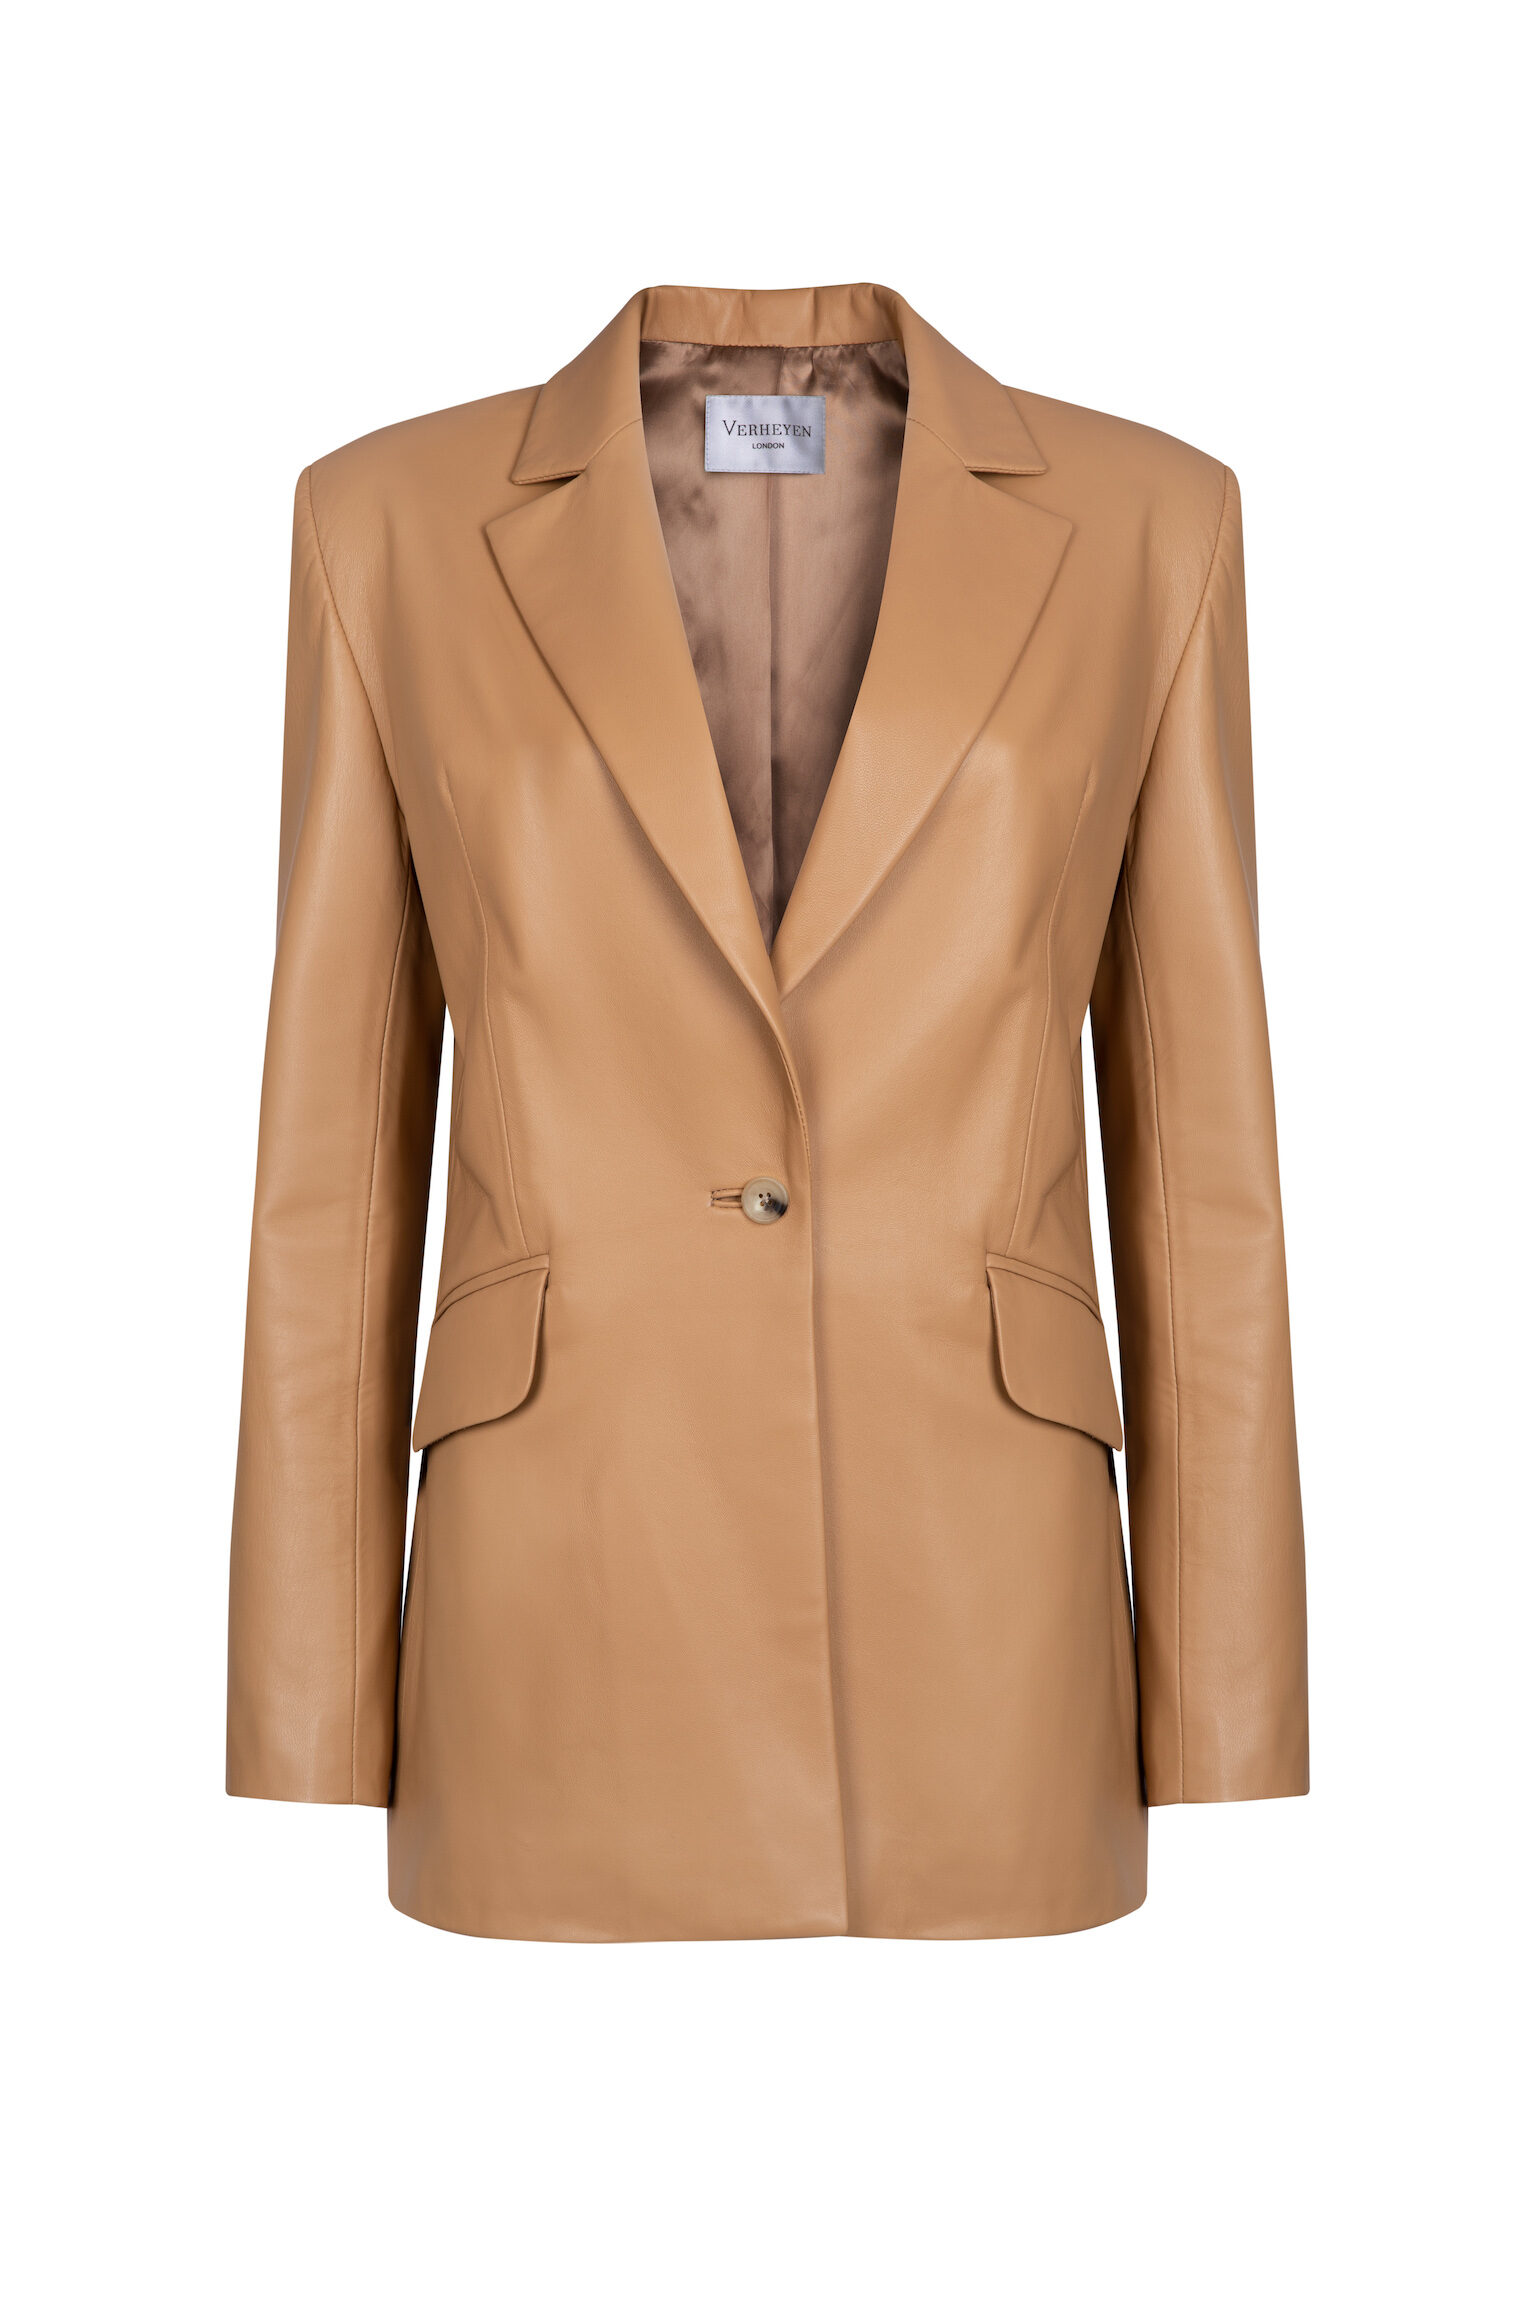 Chesca Oversize Blazer in Camel Leather